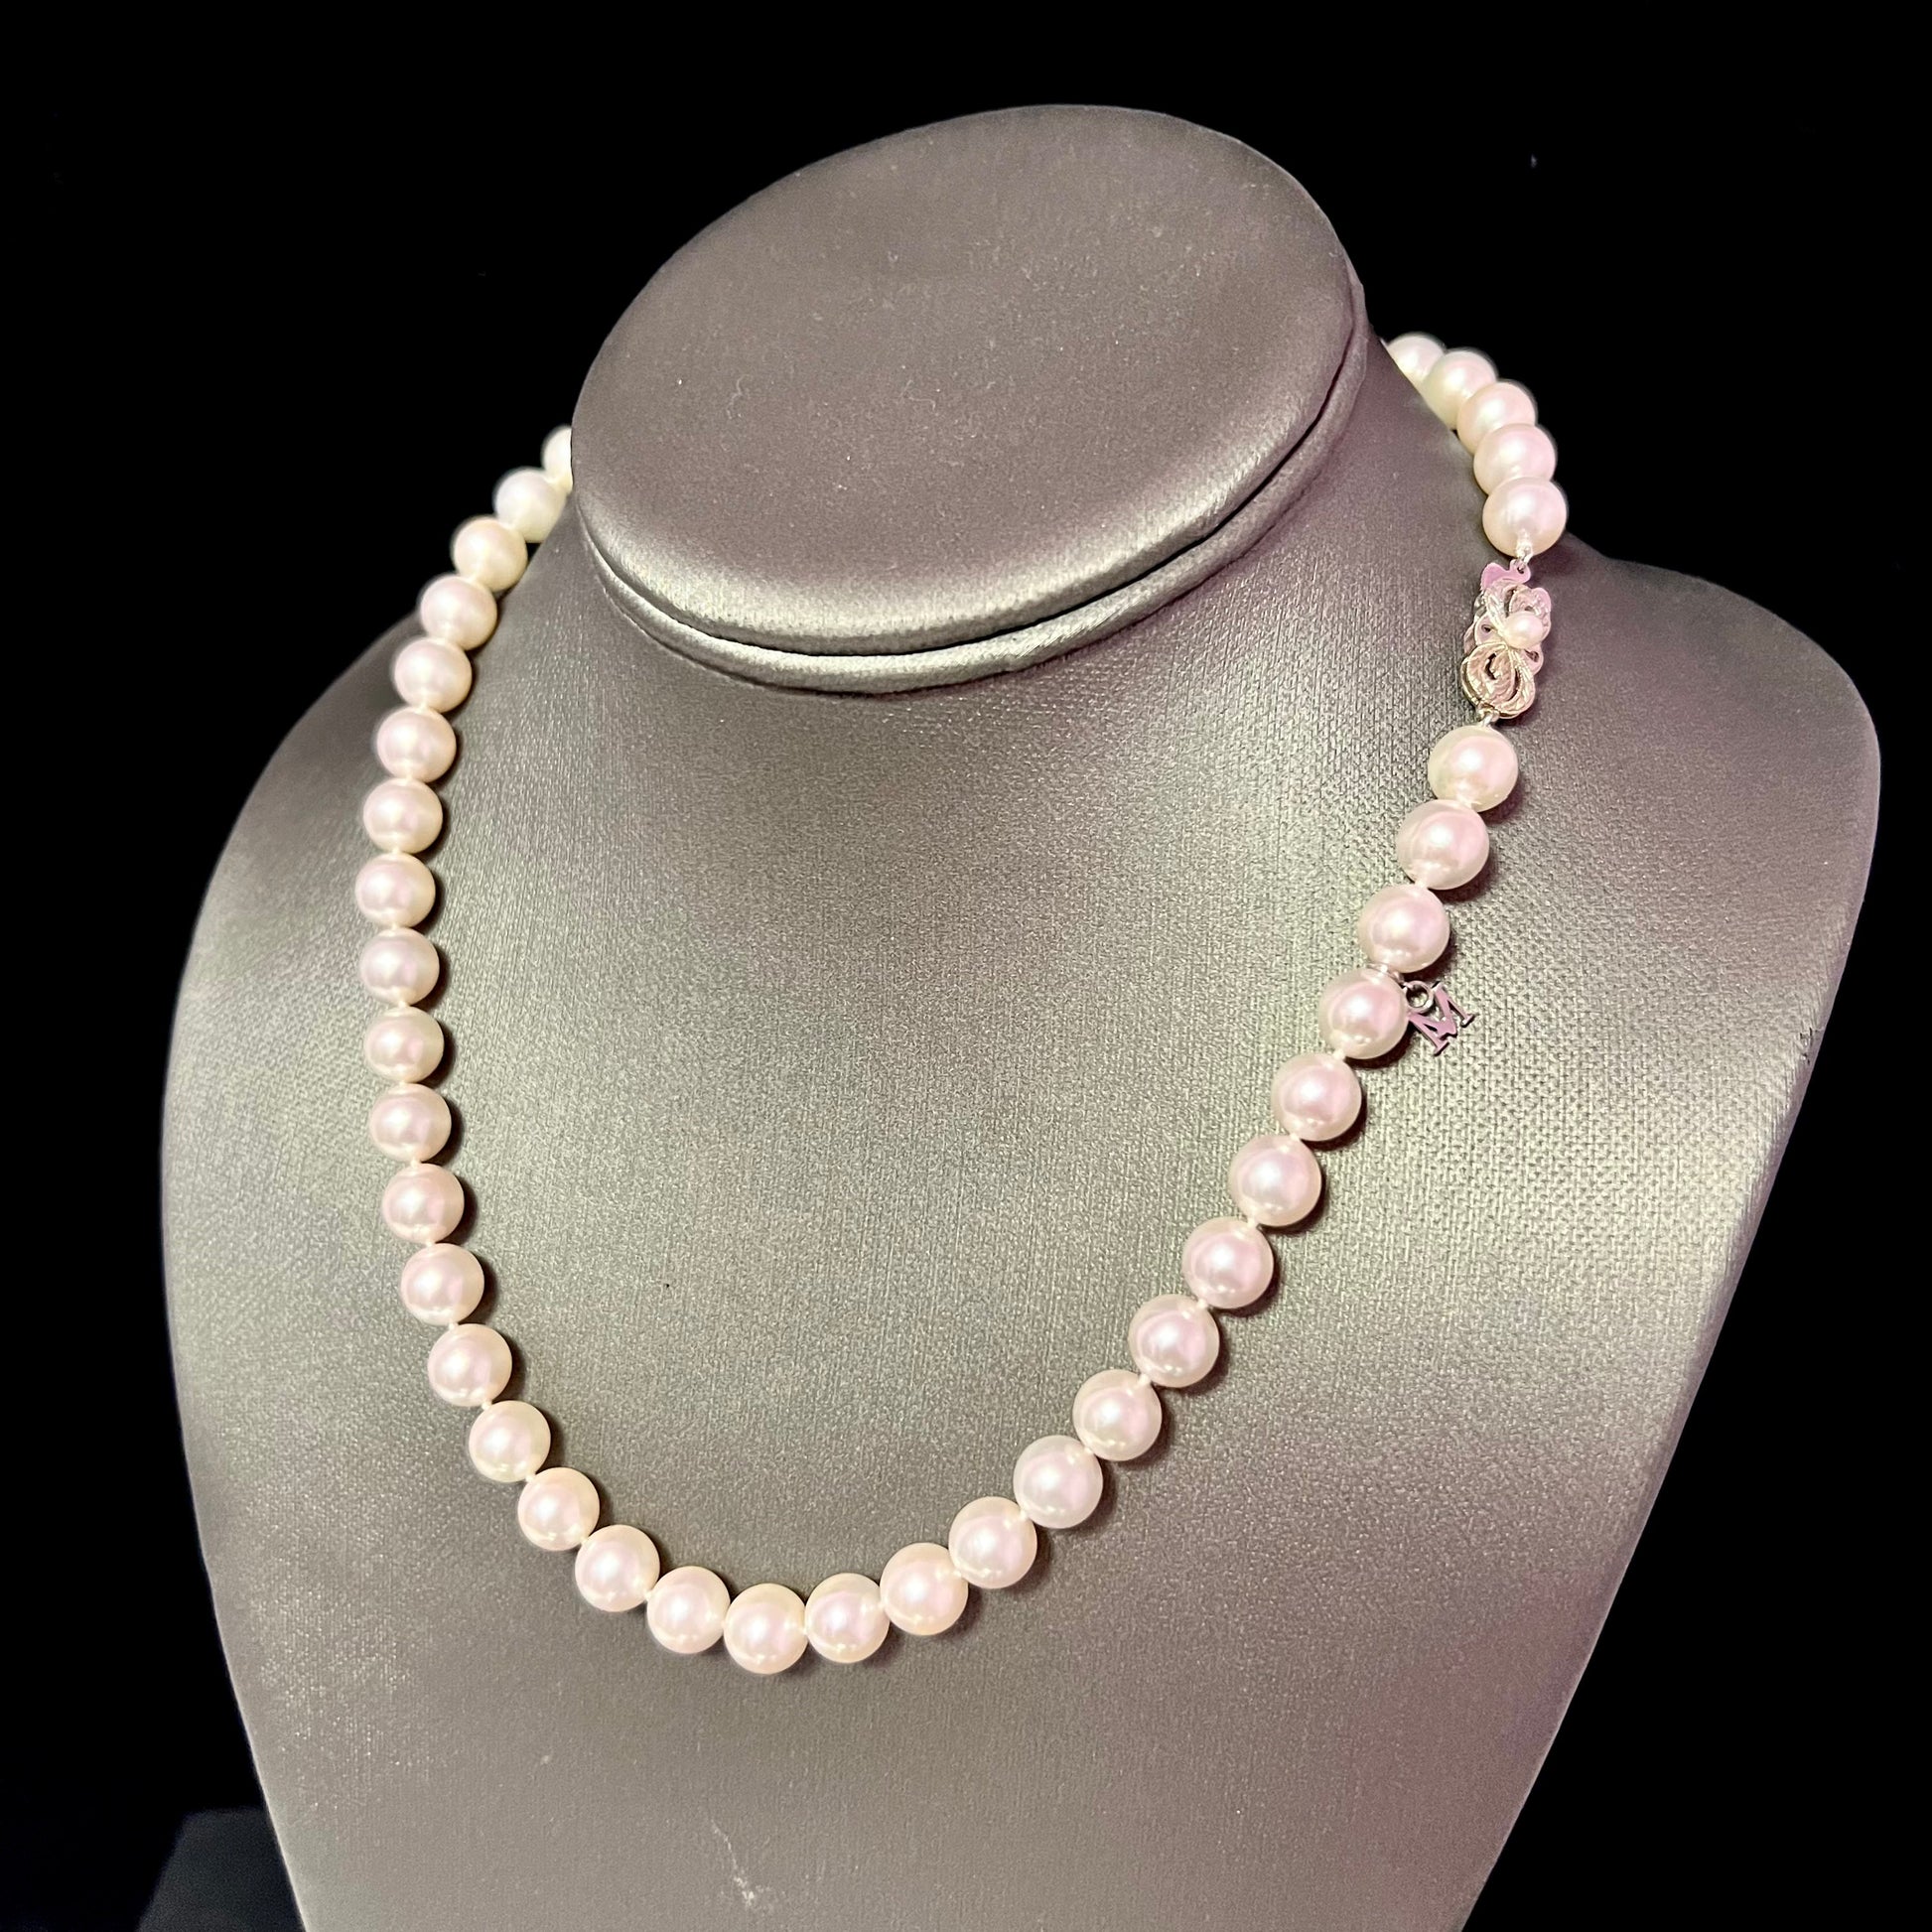 Mikimoto Estate Akoya Pearl Necklace 17.5" 18k W Gold 8.5 mm Certified $9,750 216996